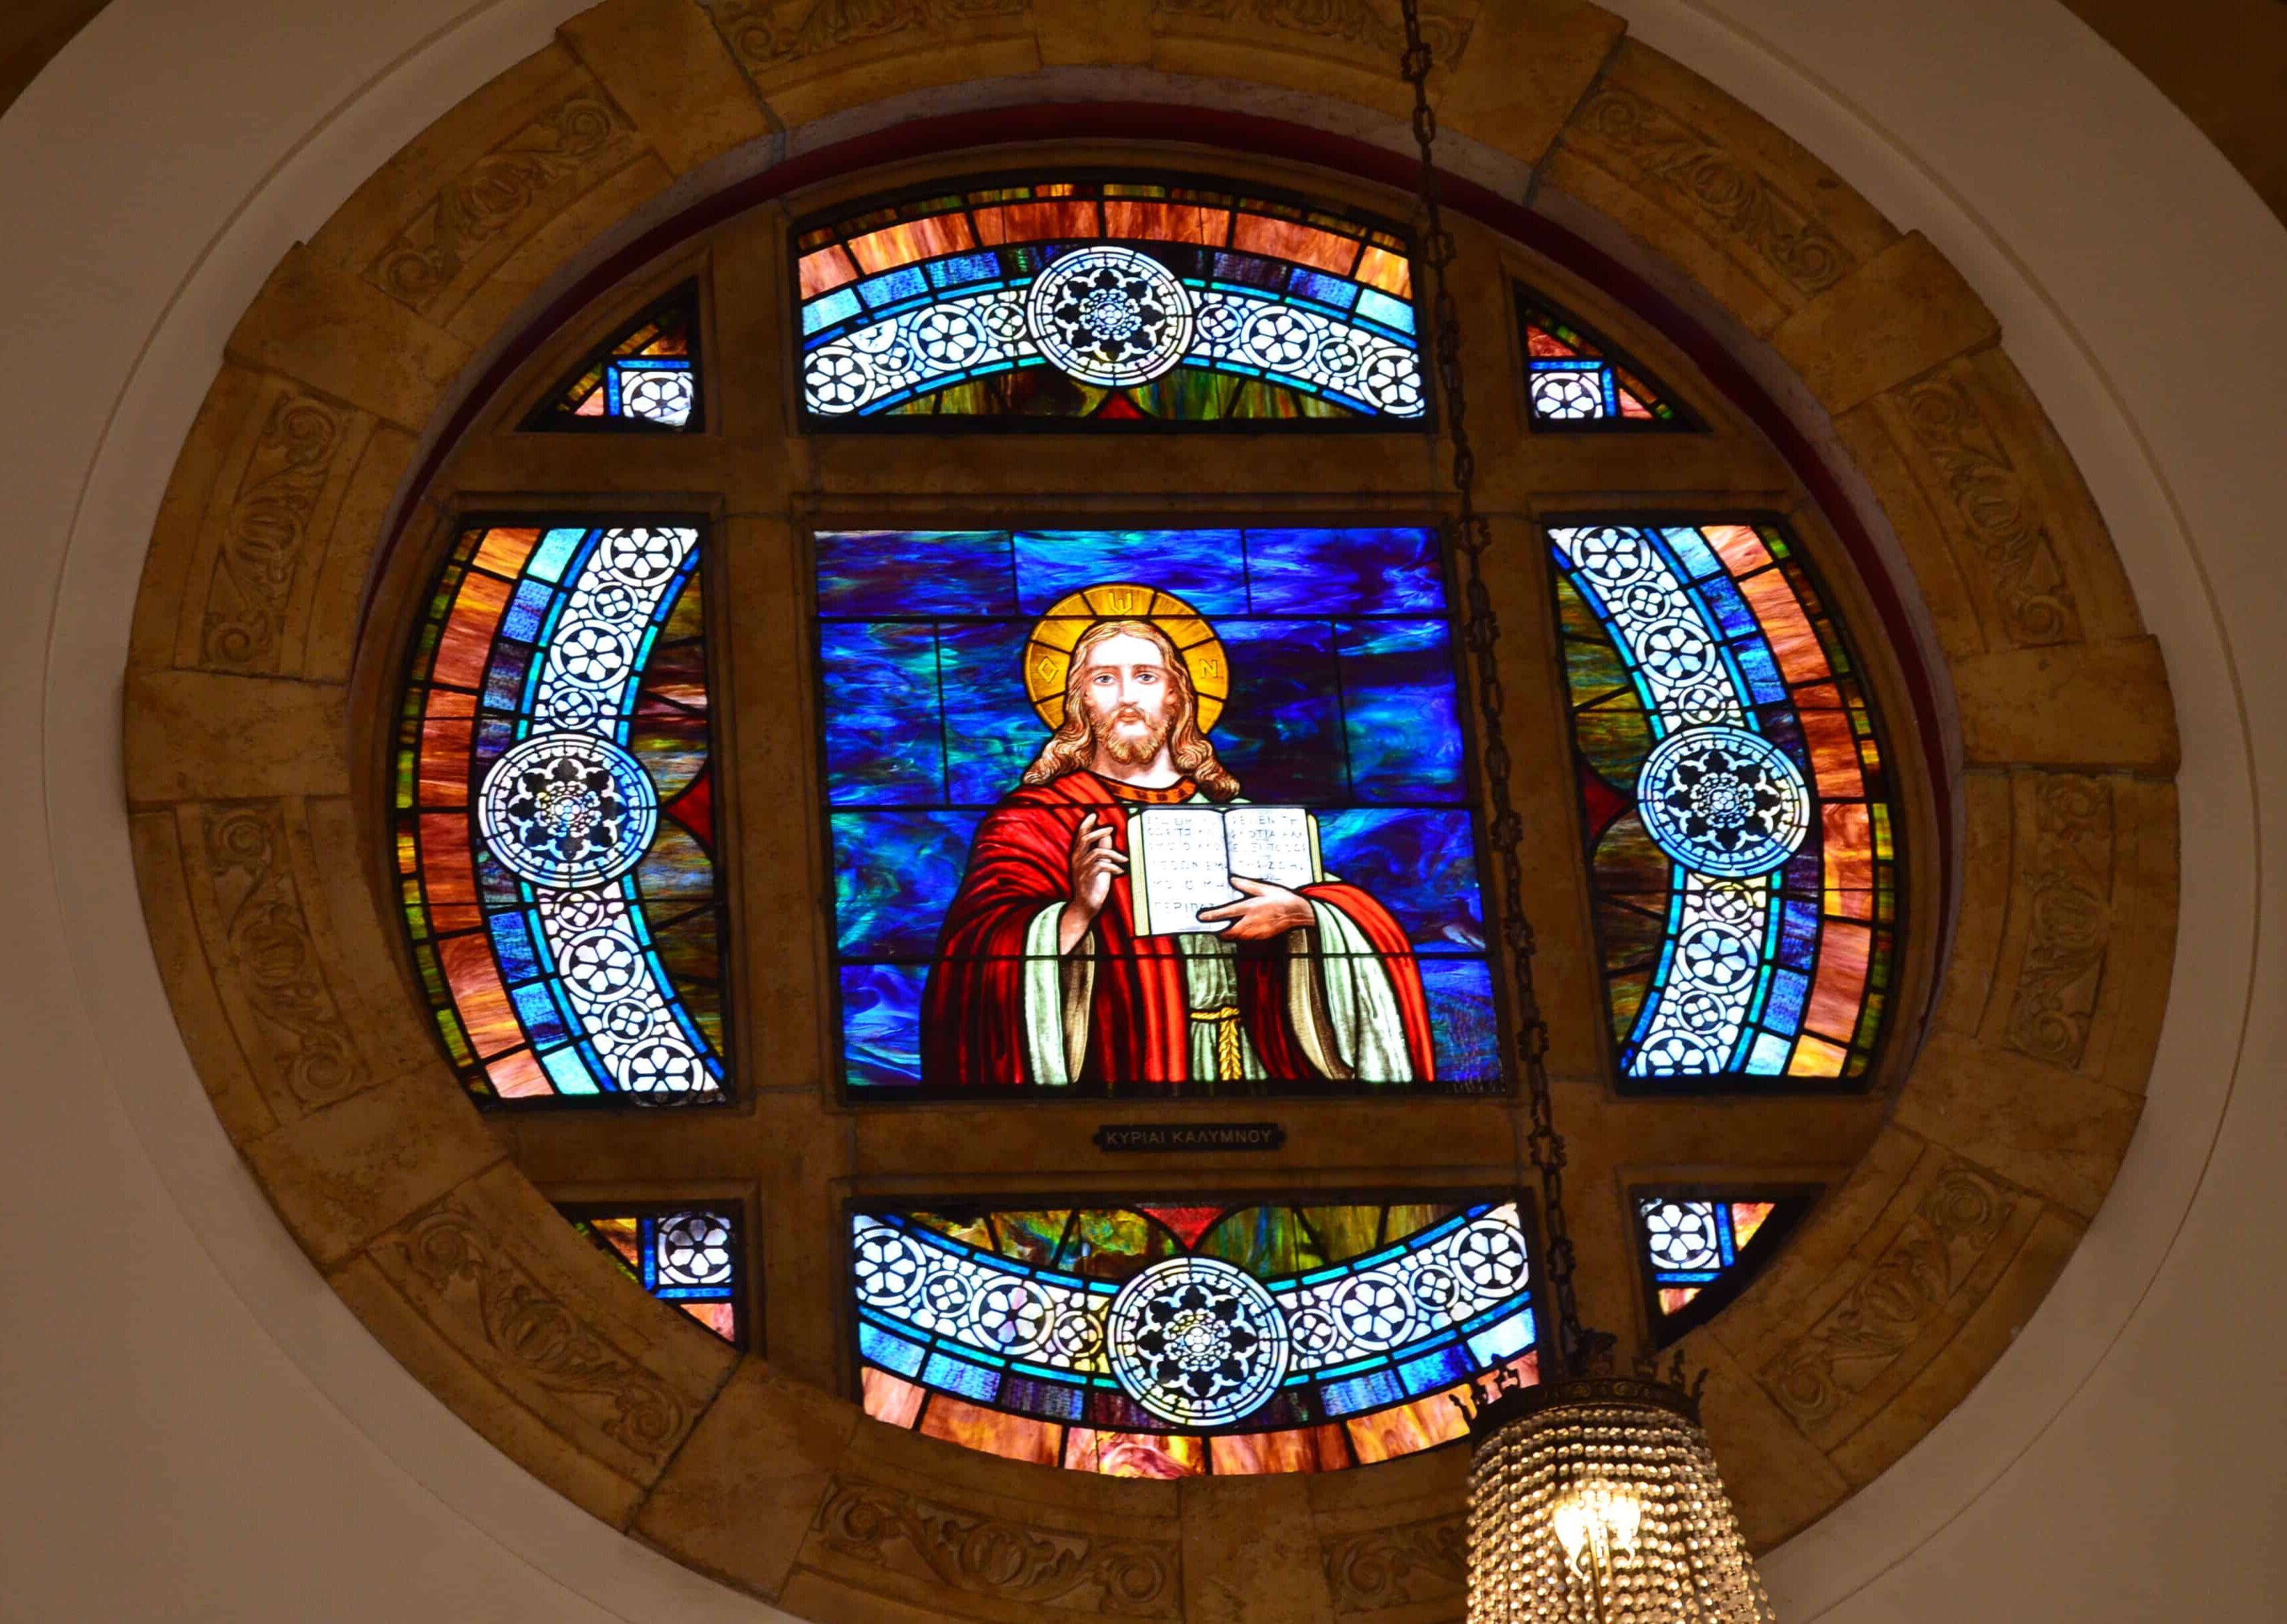 Stained glass window at St. Nicholas Greek Orthodox Cathedral in Tarpon Springs, Florida